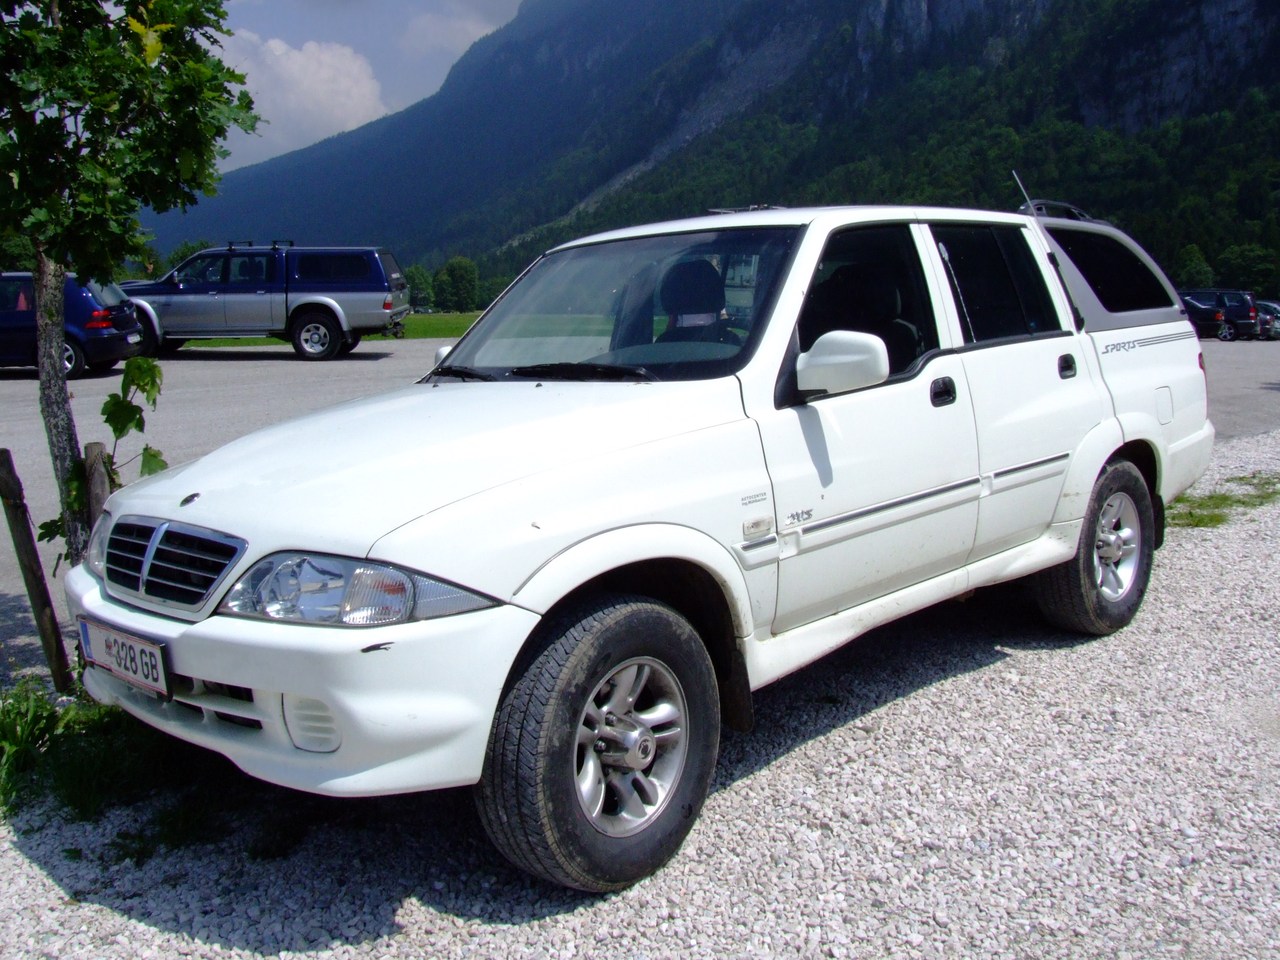 Ssangyong musso sport. Санг енг Муссо. SSANGYONG Musso 1. Санг енг Муссо спорт. SSANGYONG Musso Sport 2007.